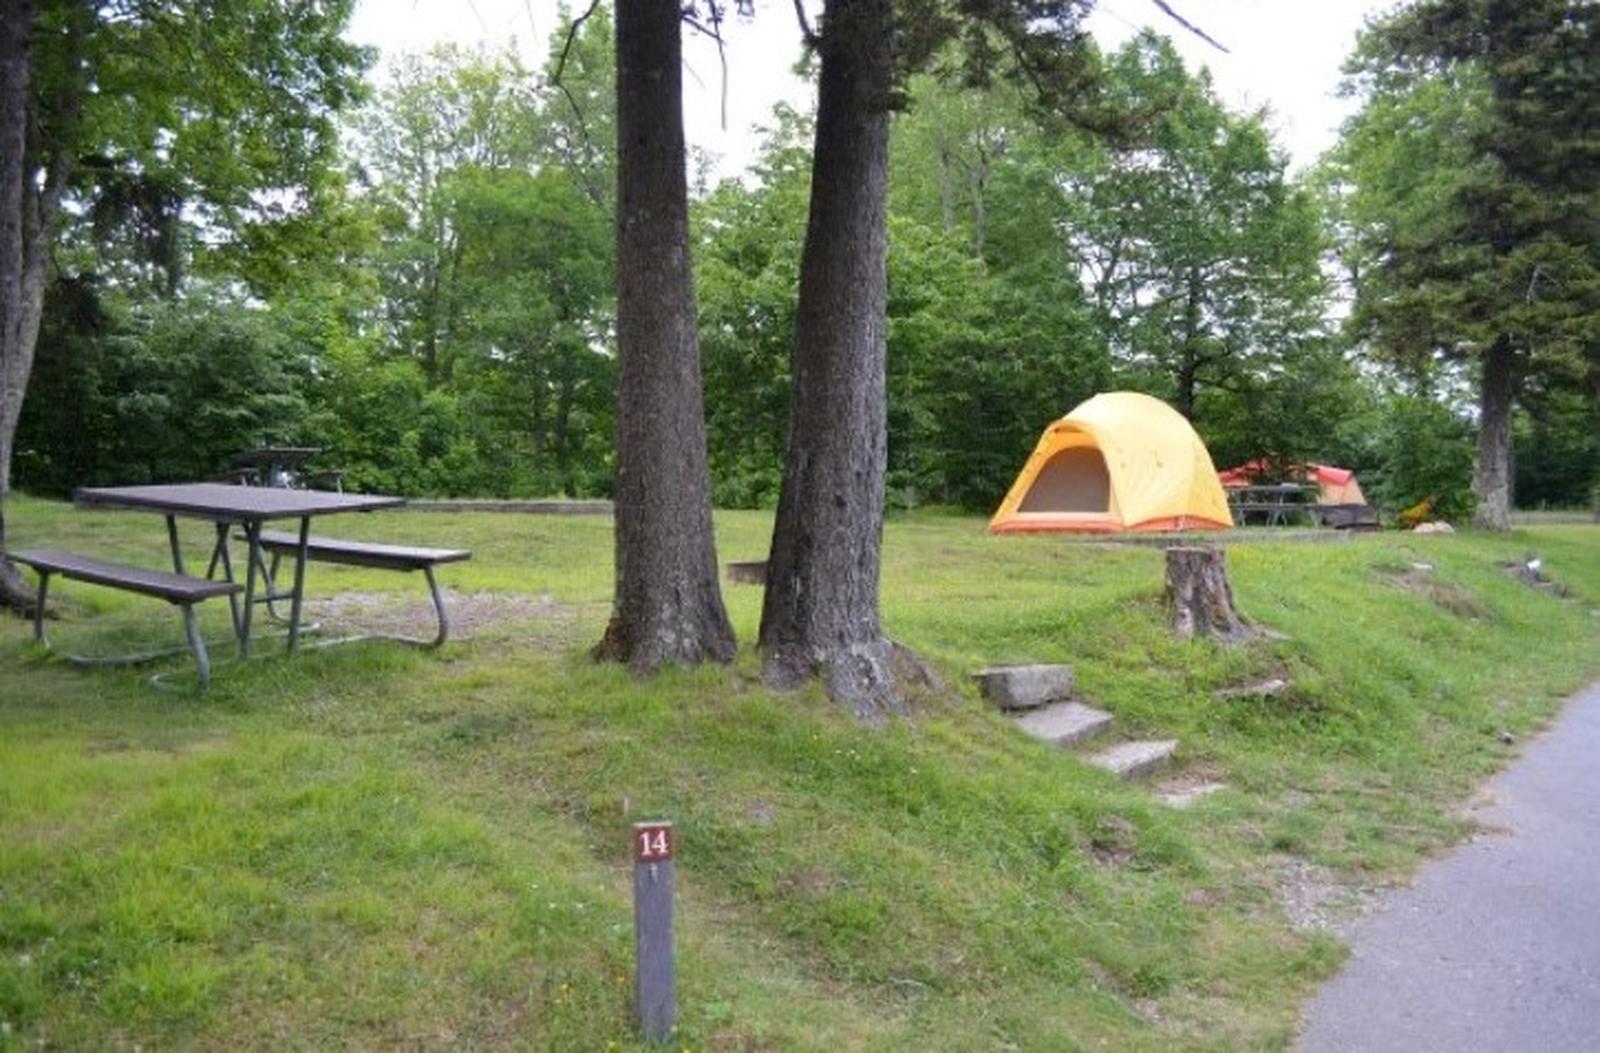  Balsam Mountain Campground Site 14